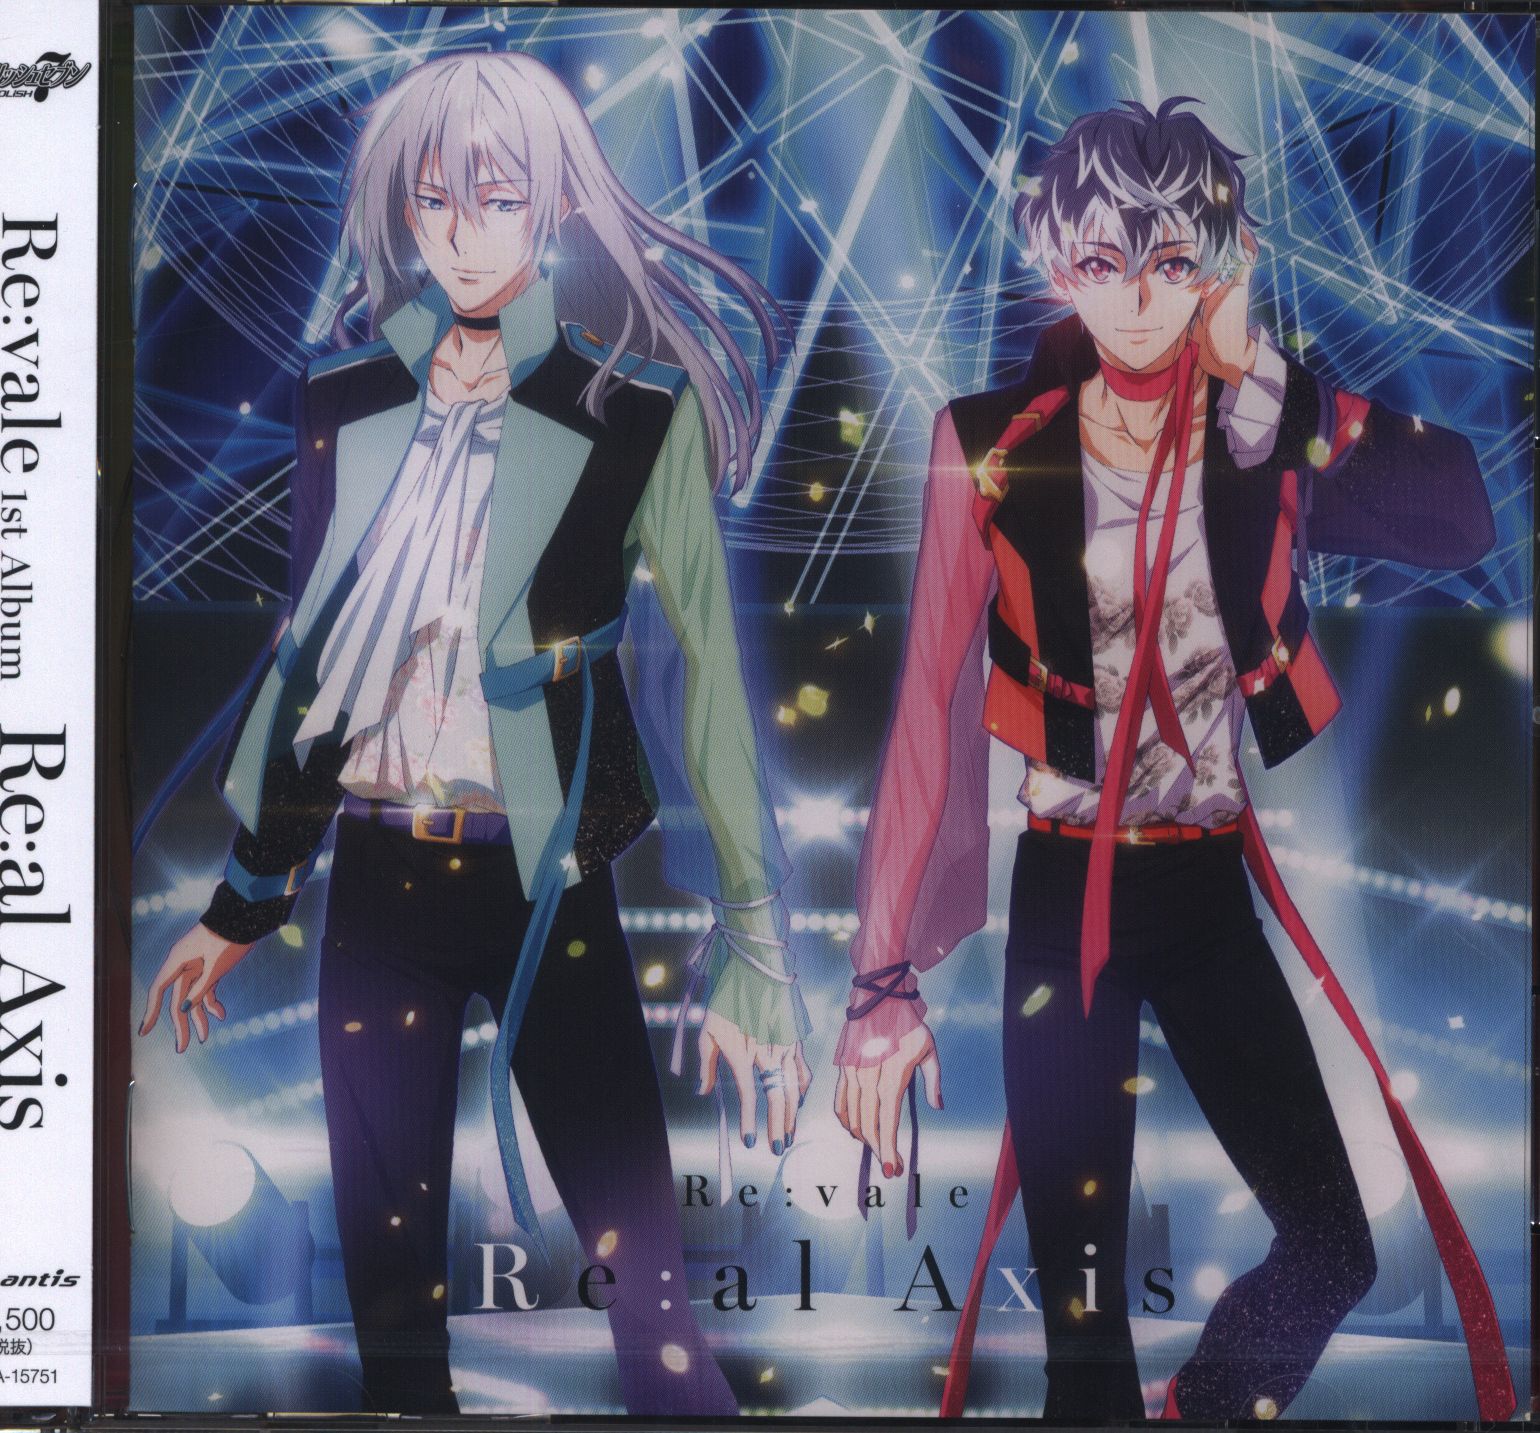 Mandarake Idolish7 Re Vale 1st Album Re Al Axis Normal Version Can Badge With Keychain Unopened